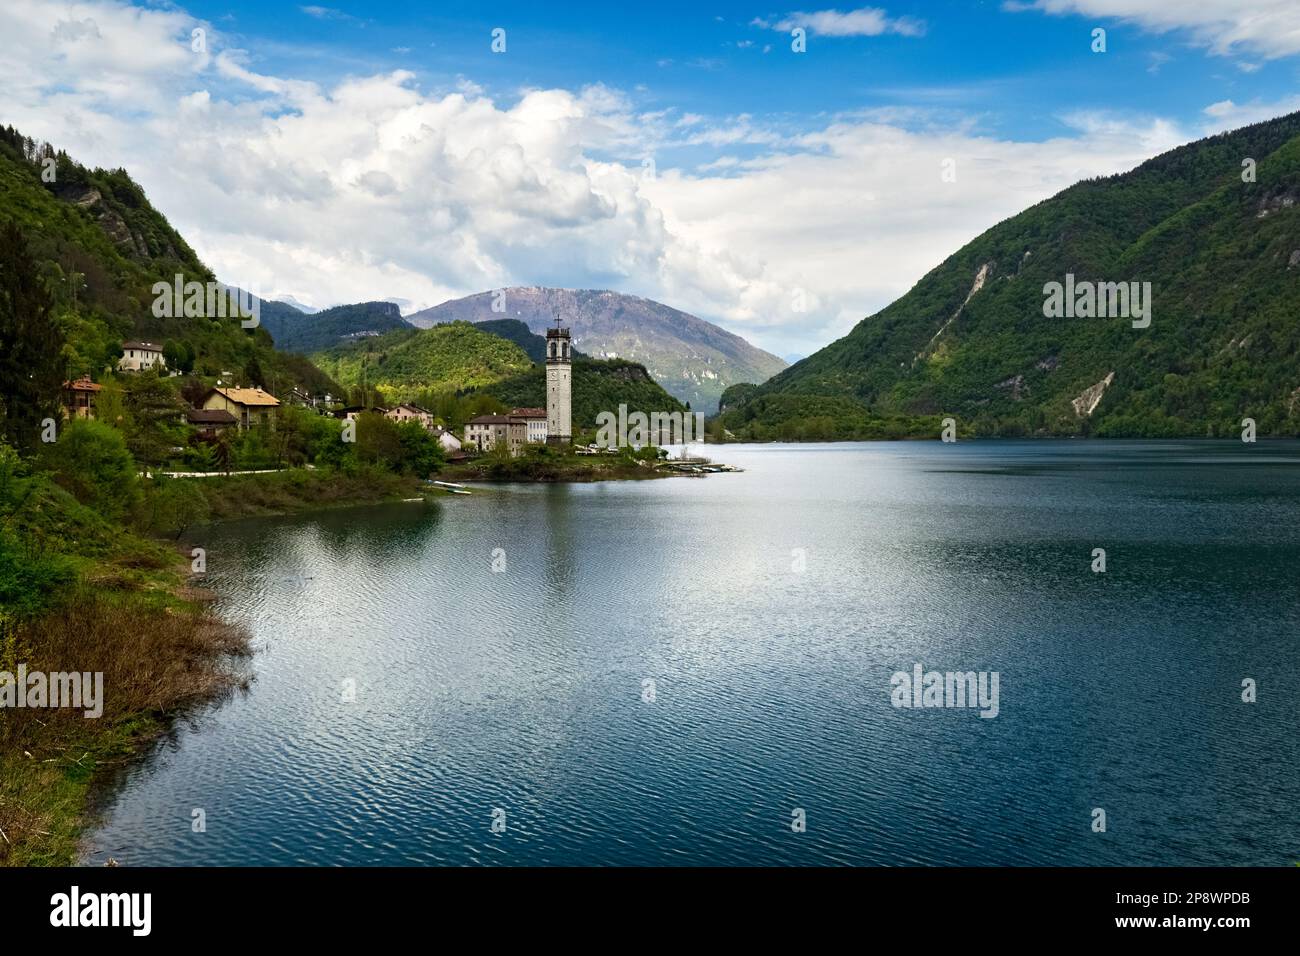 The lake of Corlo and the bell tower of the village of Rocca. Arsié, Belluno province, Veneto, Italy. Stock Photo